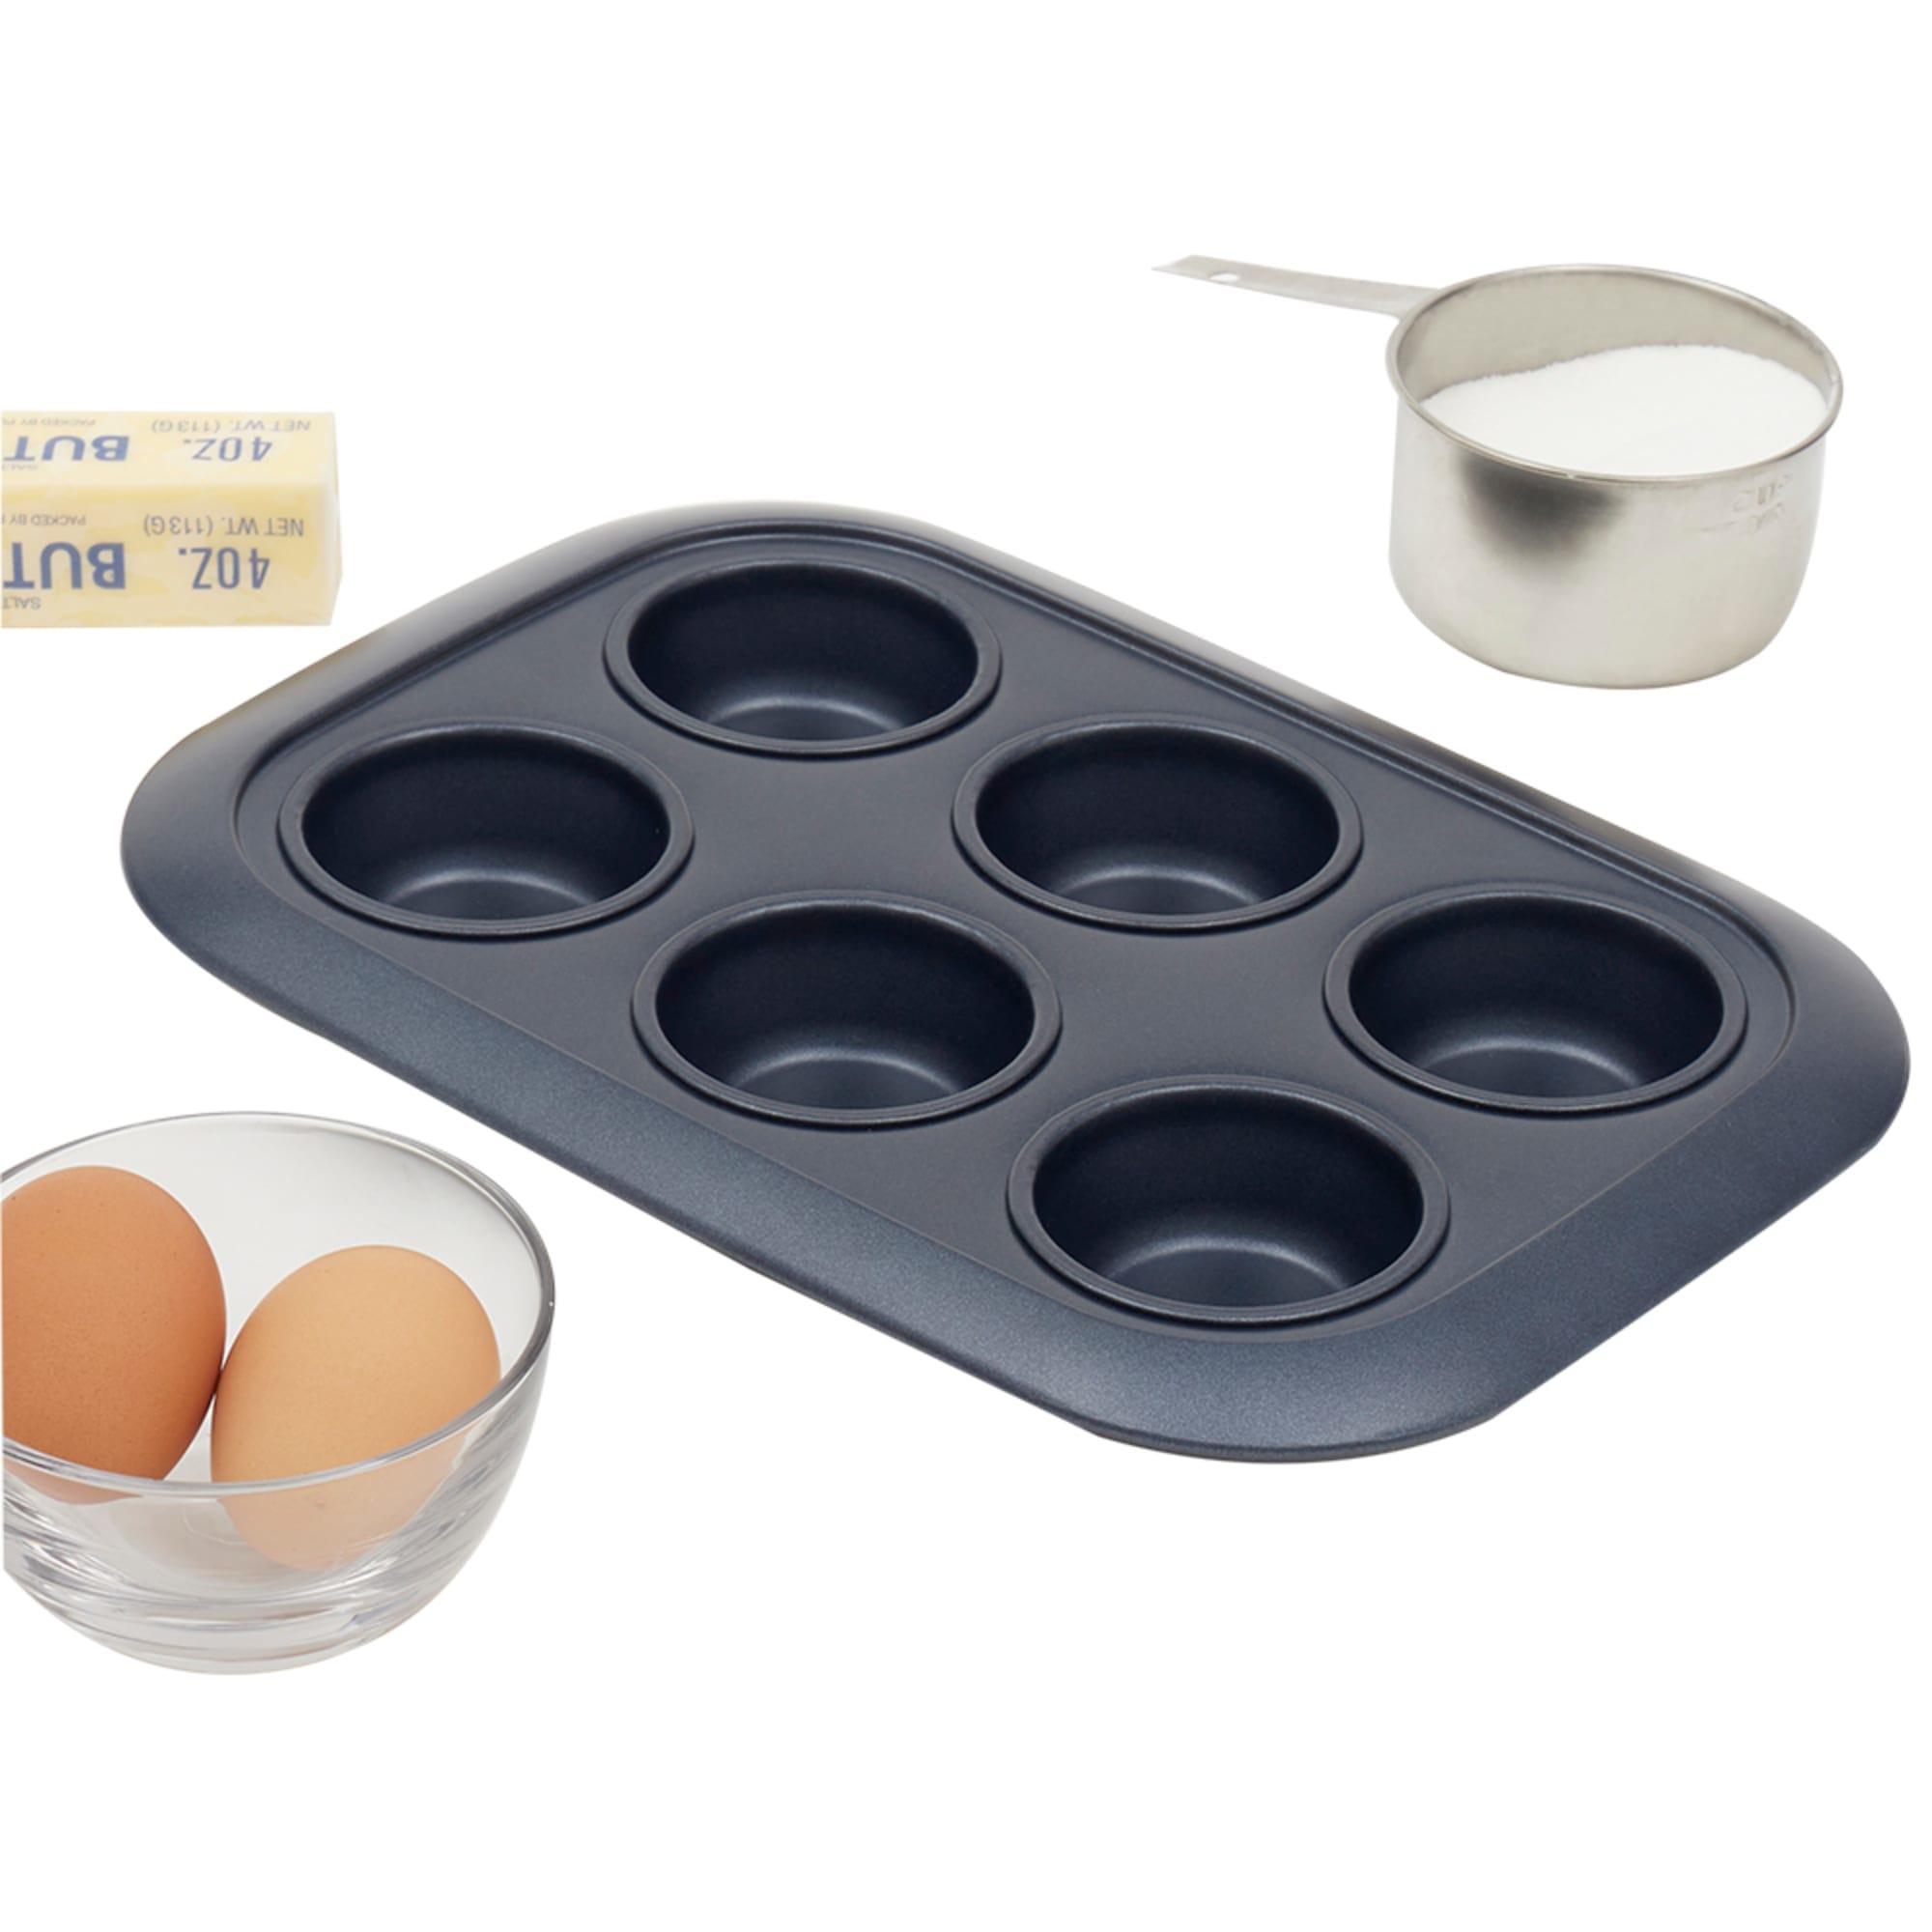 Michael Graves Design Textured Non-Stick 6 Cup Carbon Steel Muffin Pan, Indigo $5.00 EACH, CASE PACK OF 12